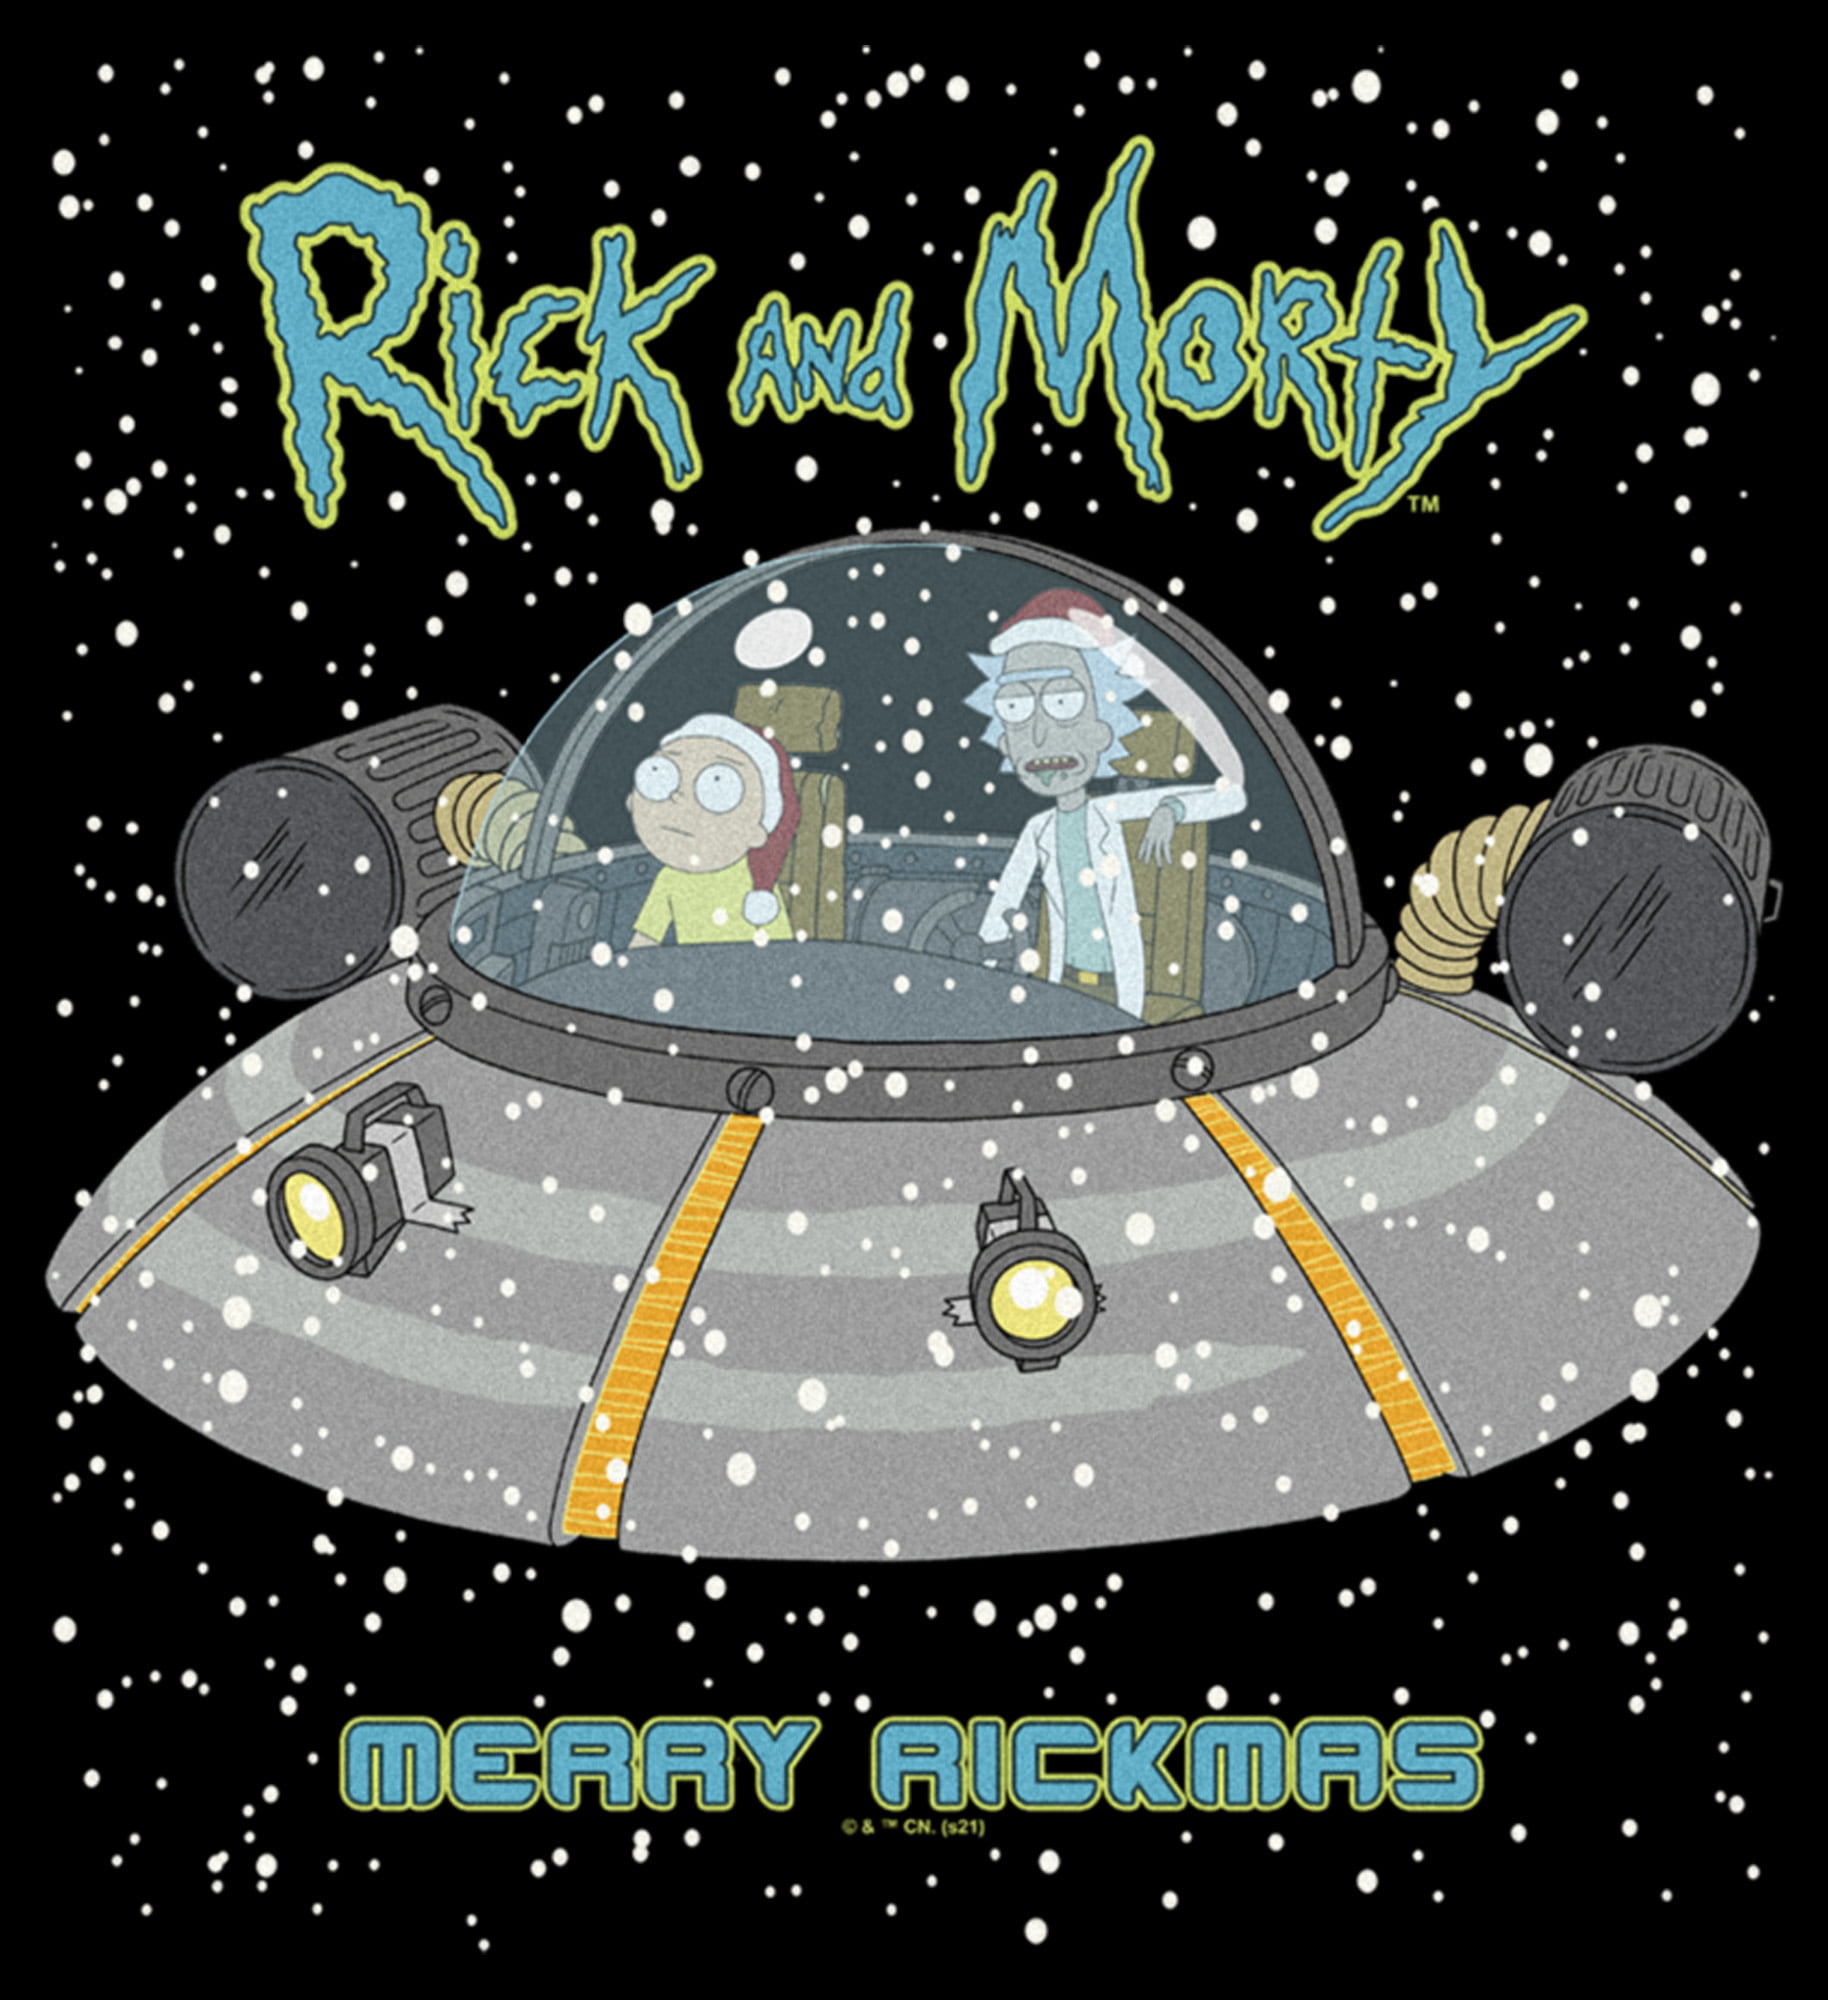 Men's Rick And Morty Snowing Spaceship Merry Rickmas Graphic Tee Black 3X  Large 